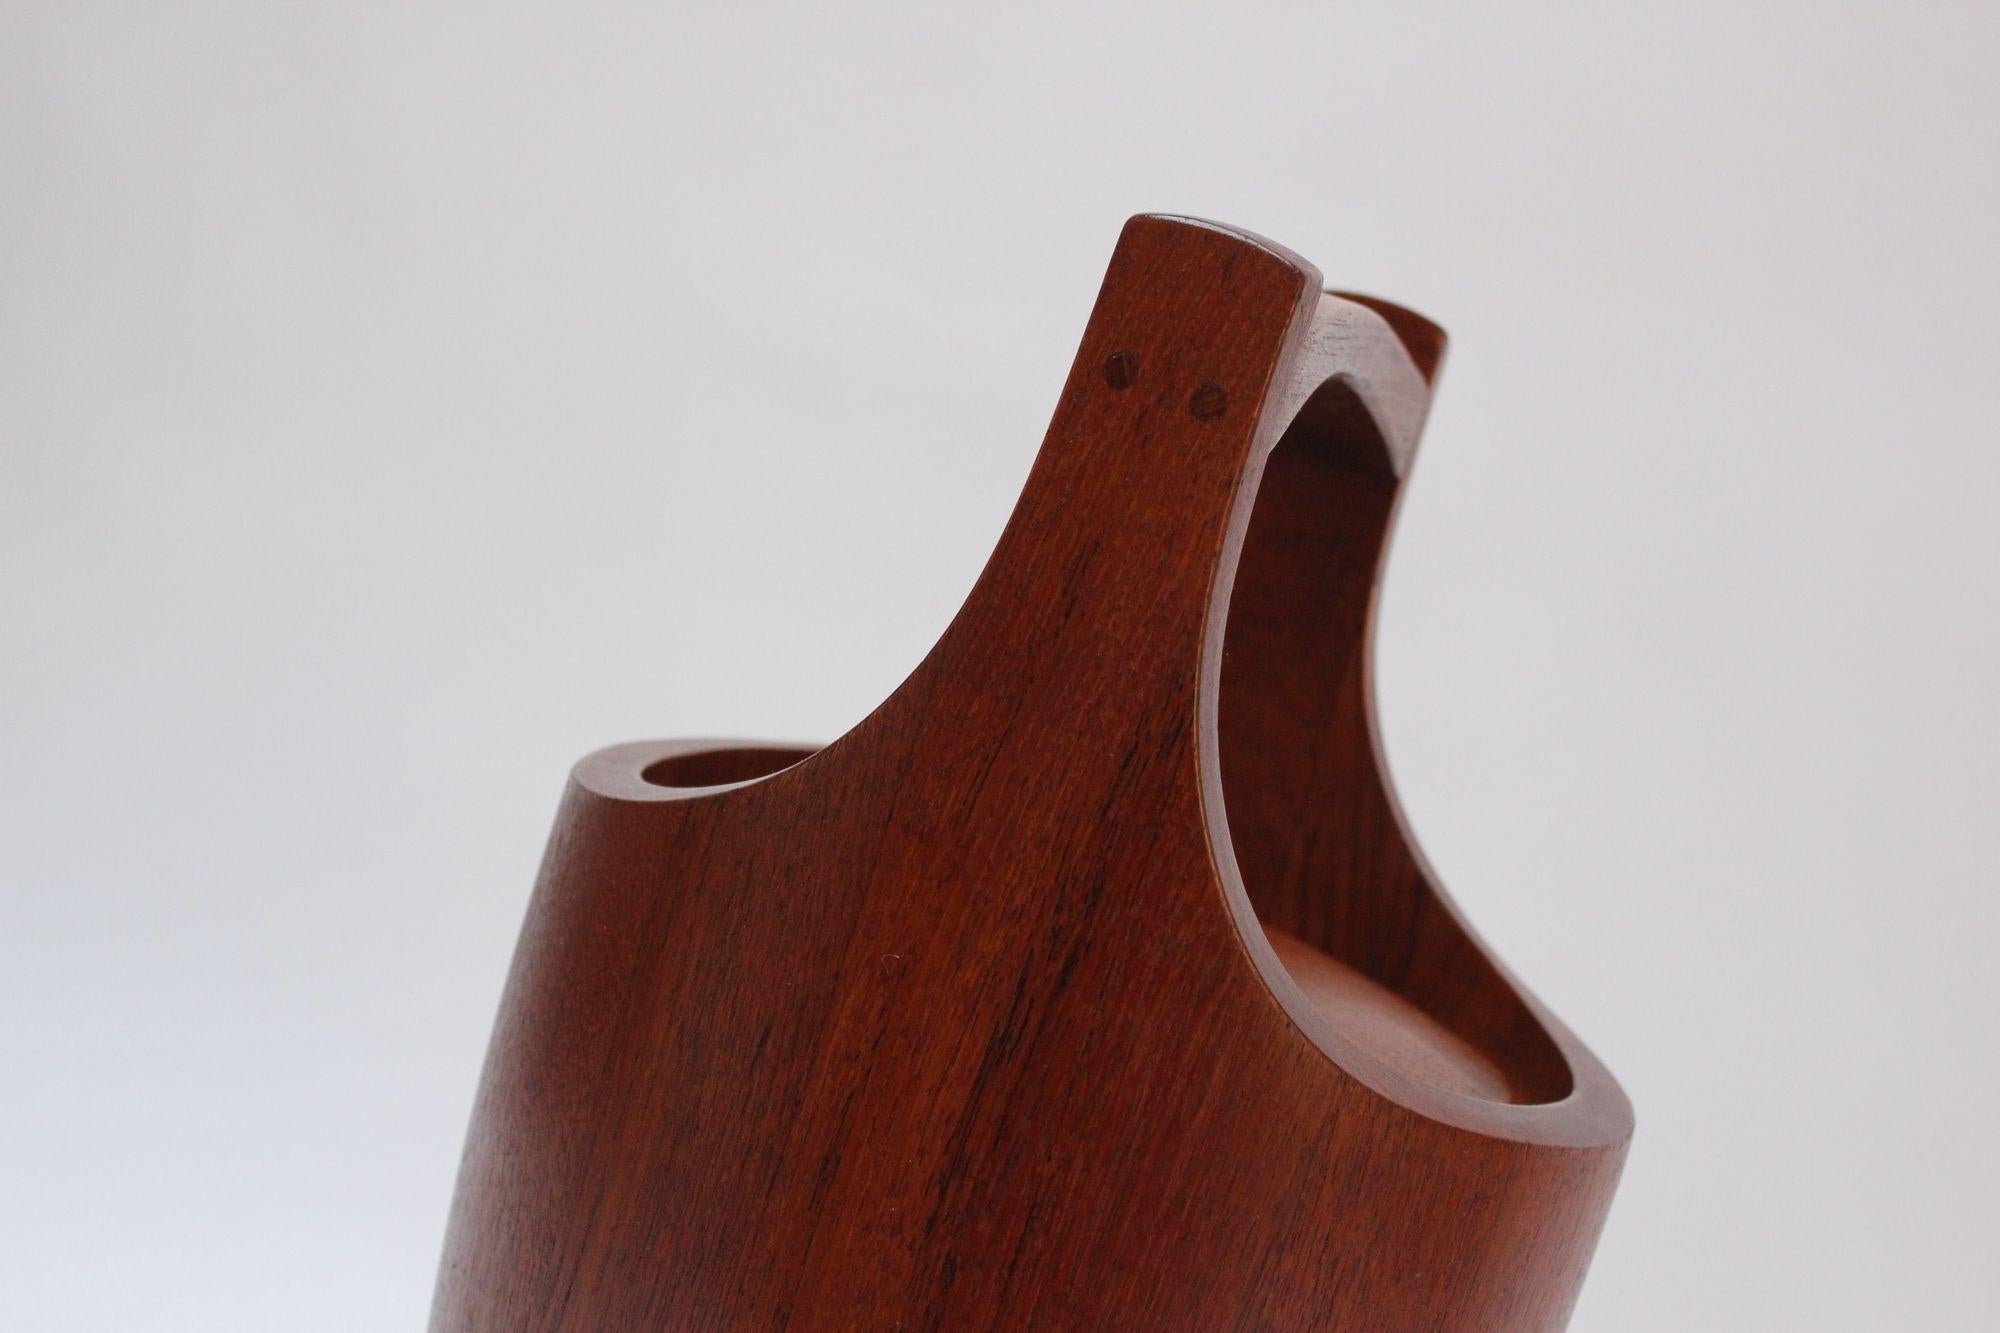 Large Staved Teak 'Congo' Ice Bucket by Jens Quistgaard for Dansk For Sale 2